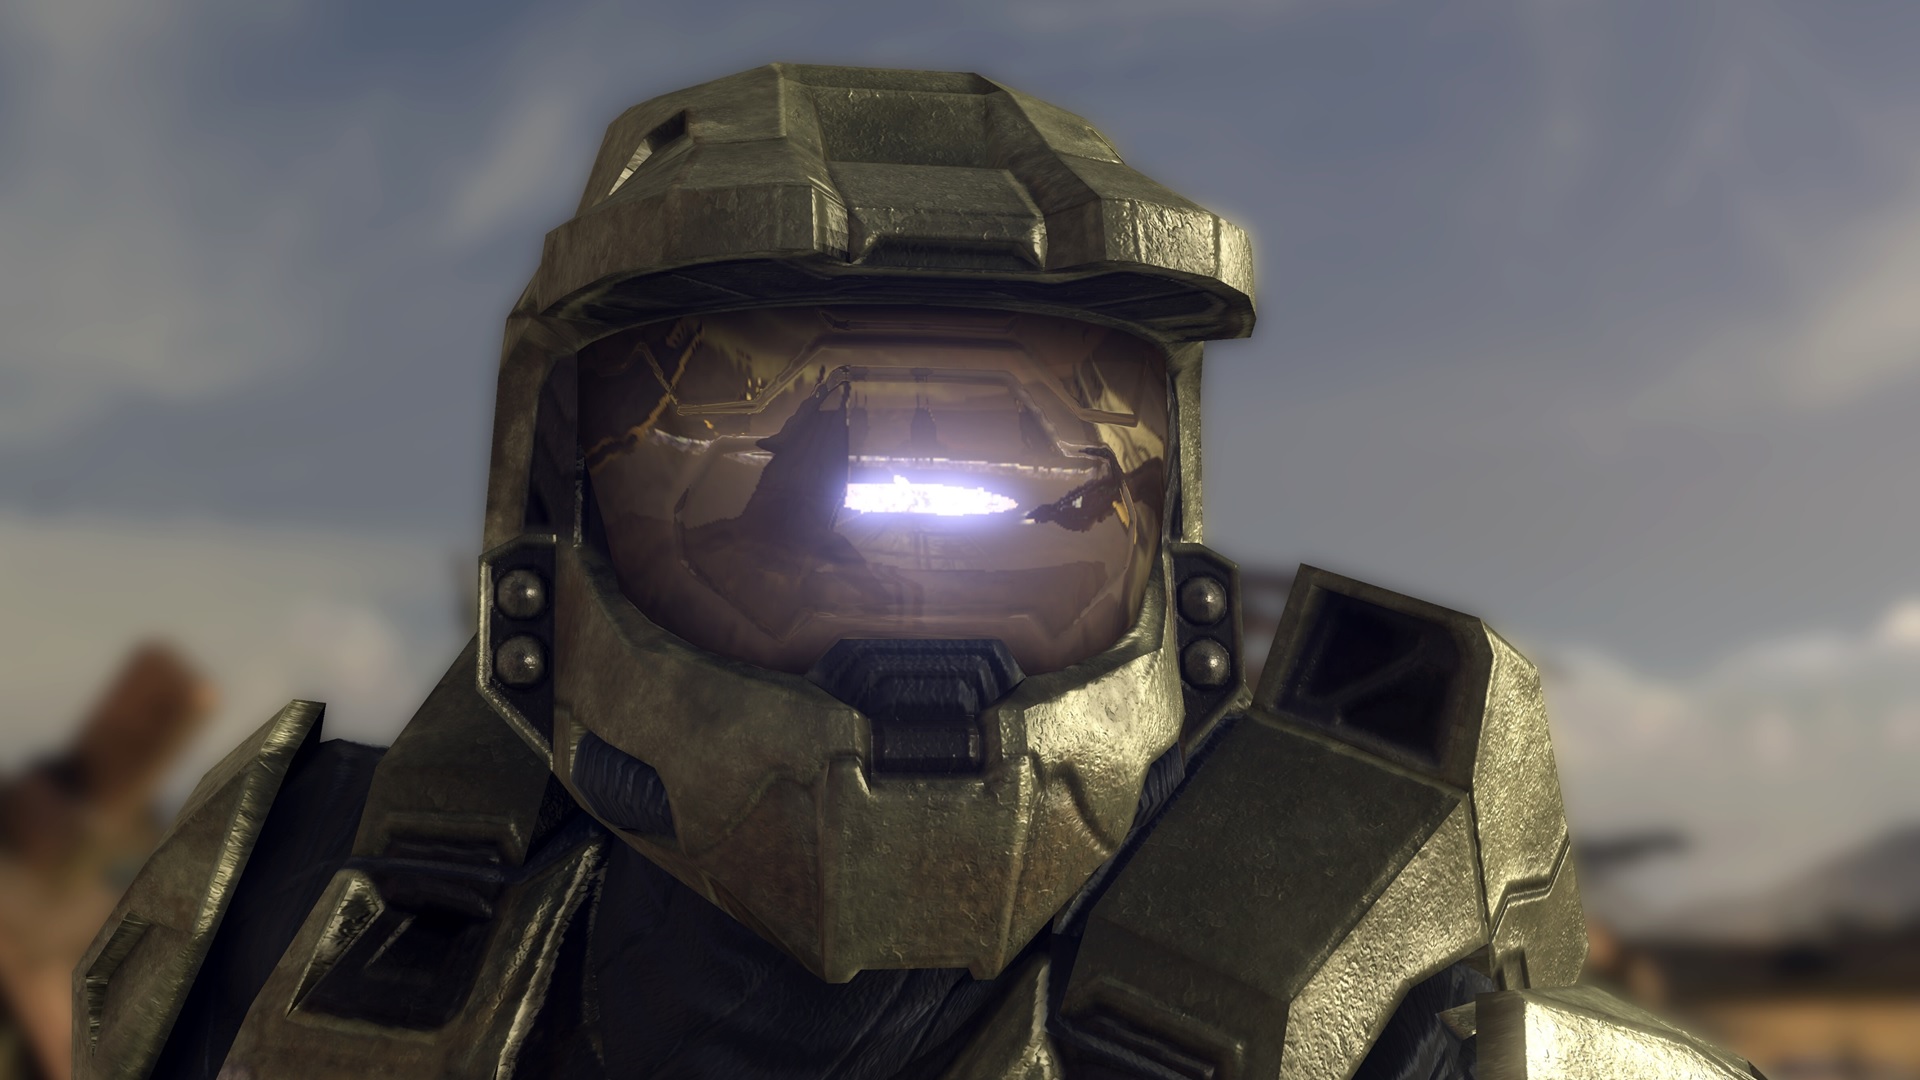 Screenshot of Halo 3's announcement teaser from E3 2006 of the Master Chief looking at the portal artifact's activation